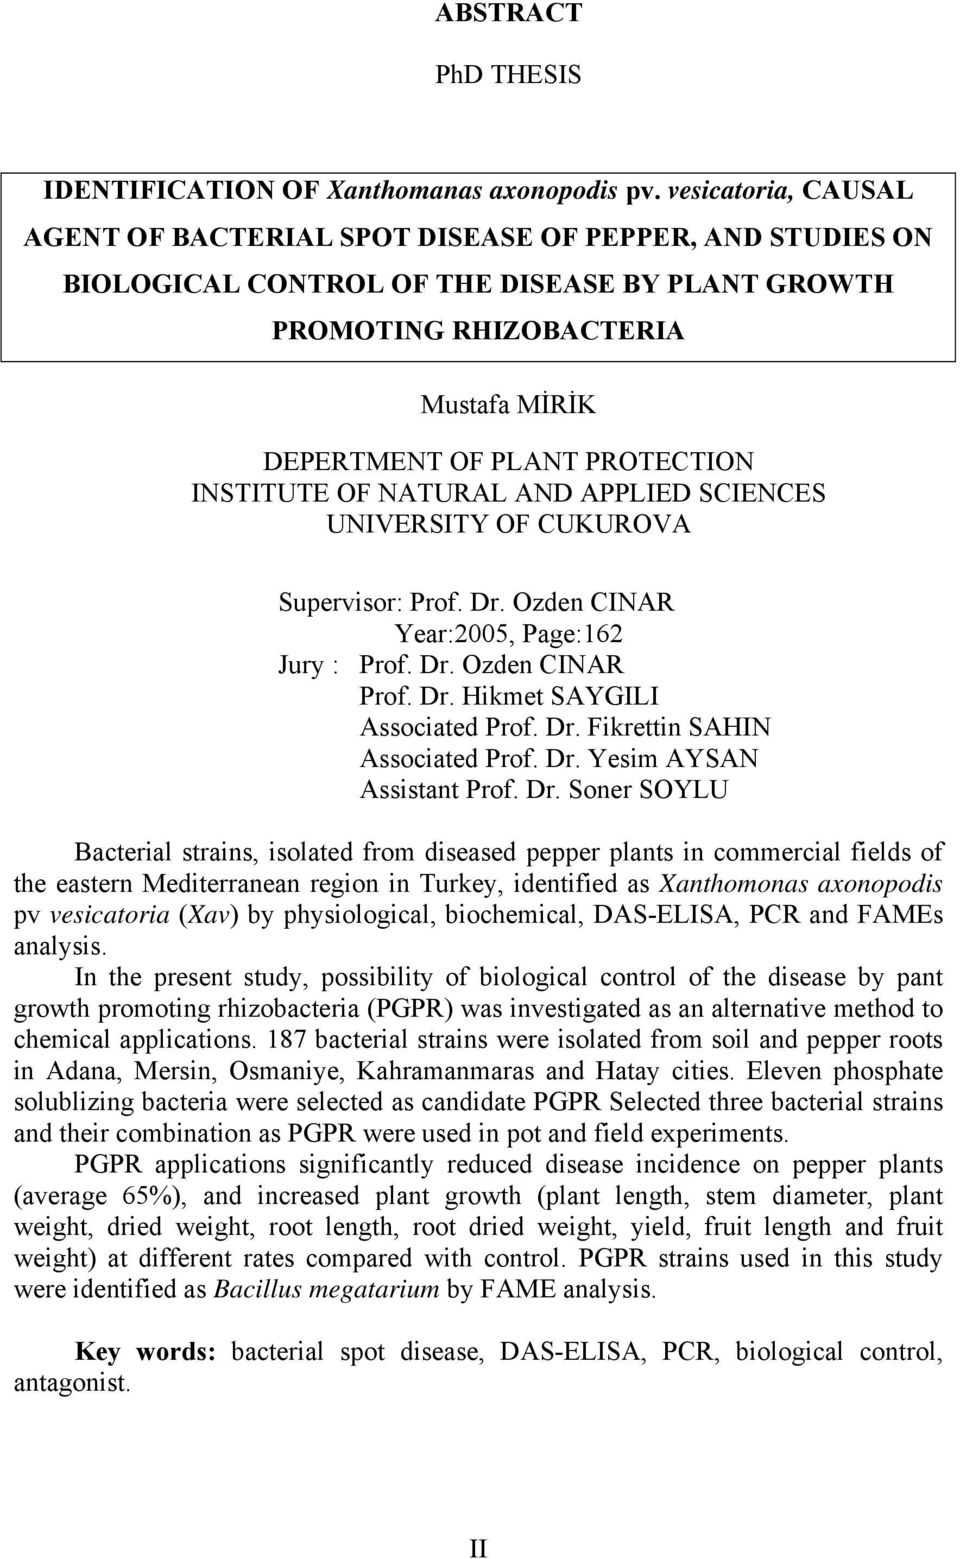 NATURAL AND APPLIED SCIENCES UNIVERSITY OF CUKUROVA Supervisor: Prof. Dr. Ozden CINAR Year:2005, Page:162 Jury : Prof. Dr. Ozden CINAR Prof. Dr. Hikmet SAYGILI Associated Prof. Dr. Fikrettin SAHIN Associated Prof.